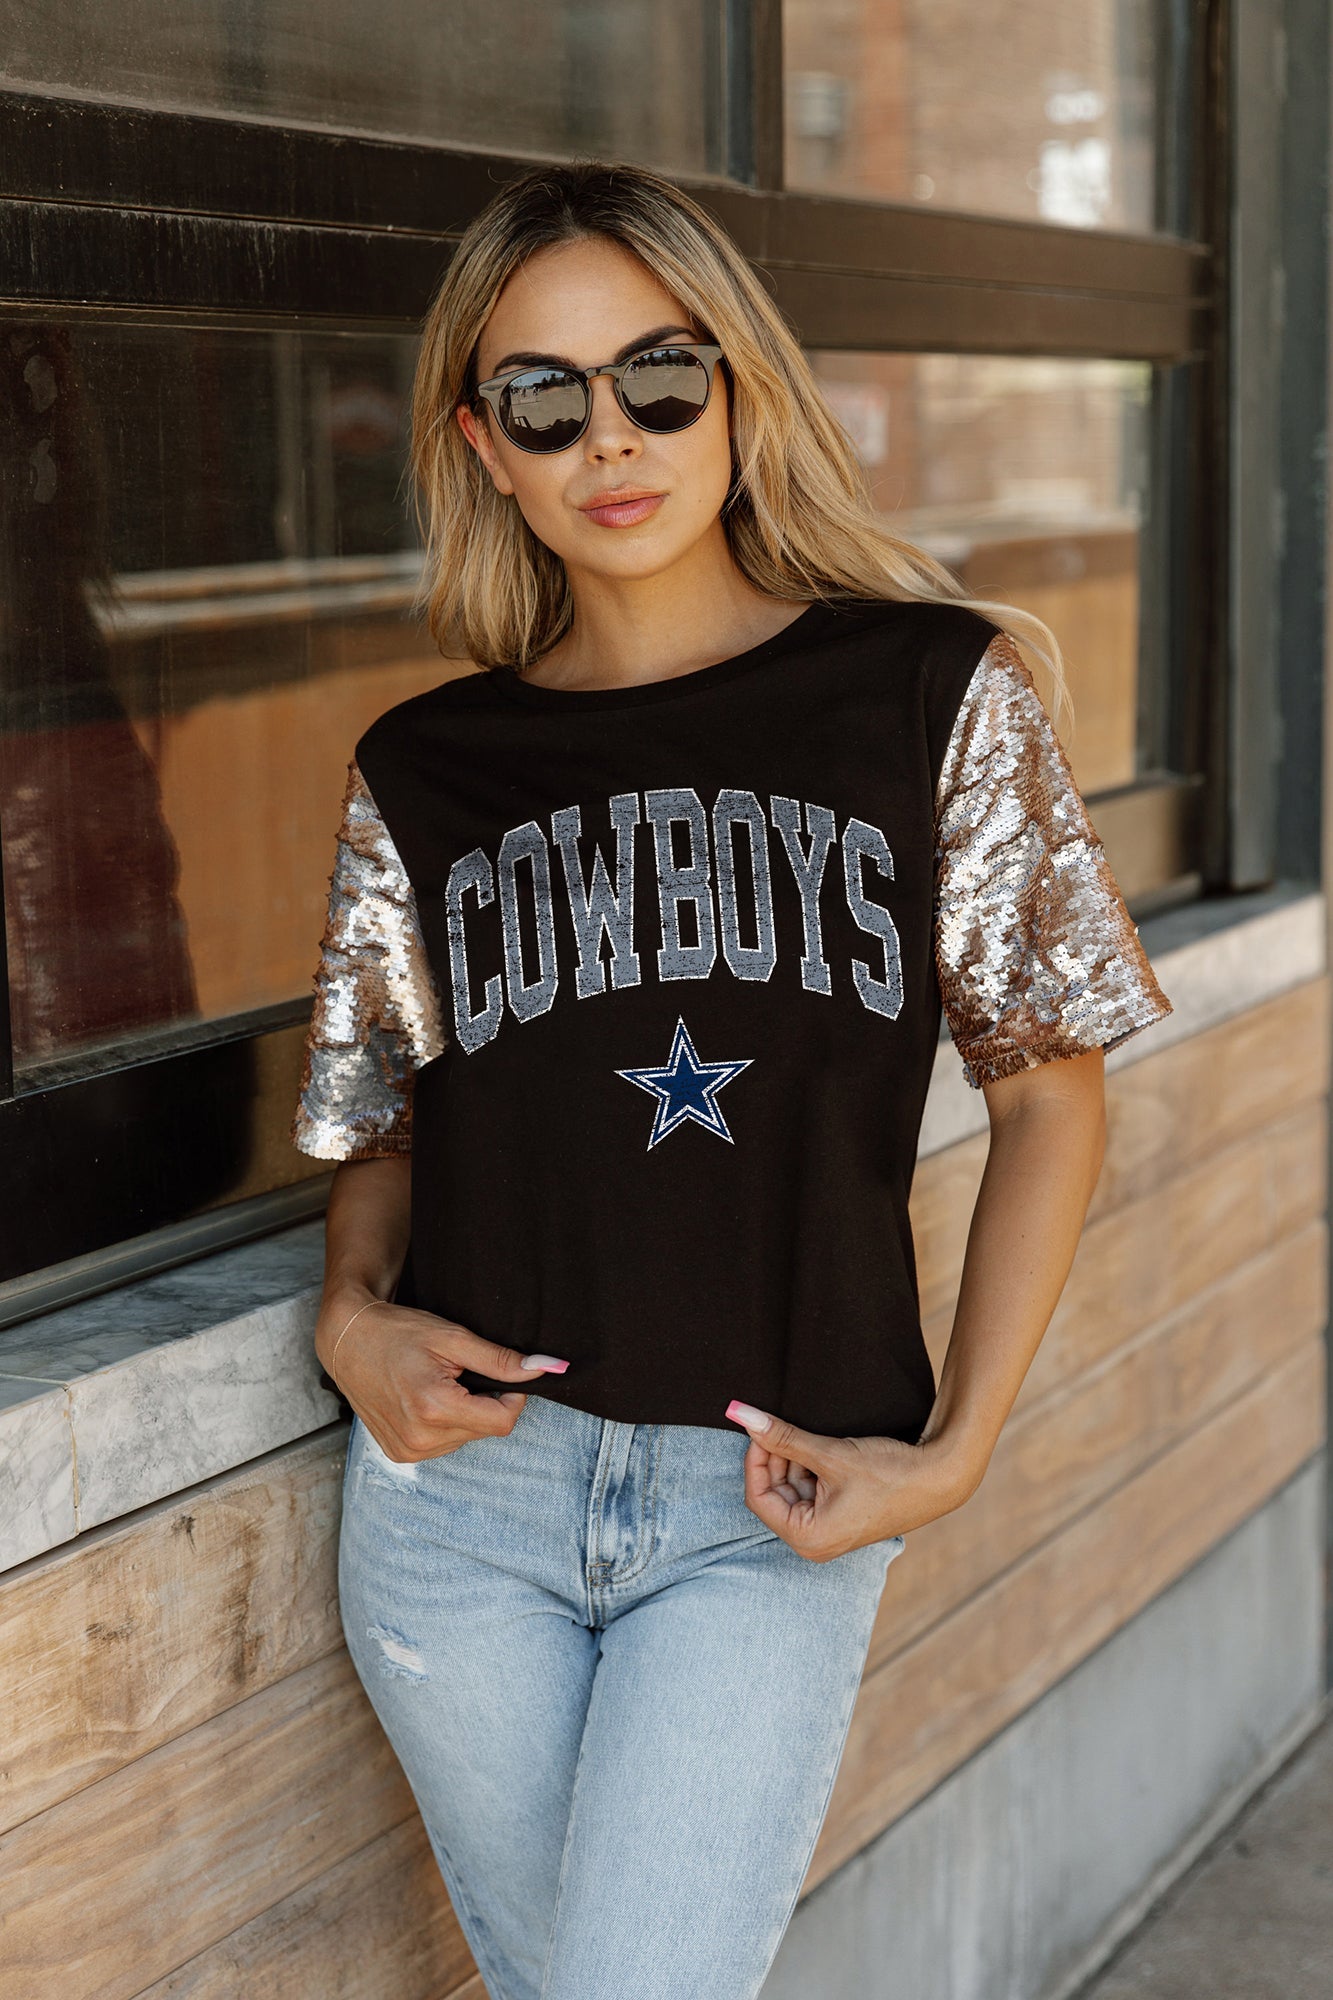 DALLAS COWBOYS GL SHORT SLEEVE TOP WITH LINED FLIP-SEQUIN SLEEVES